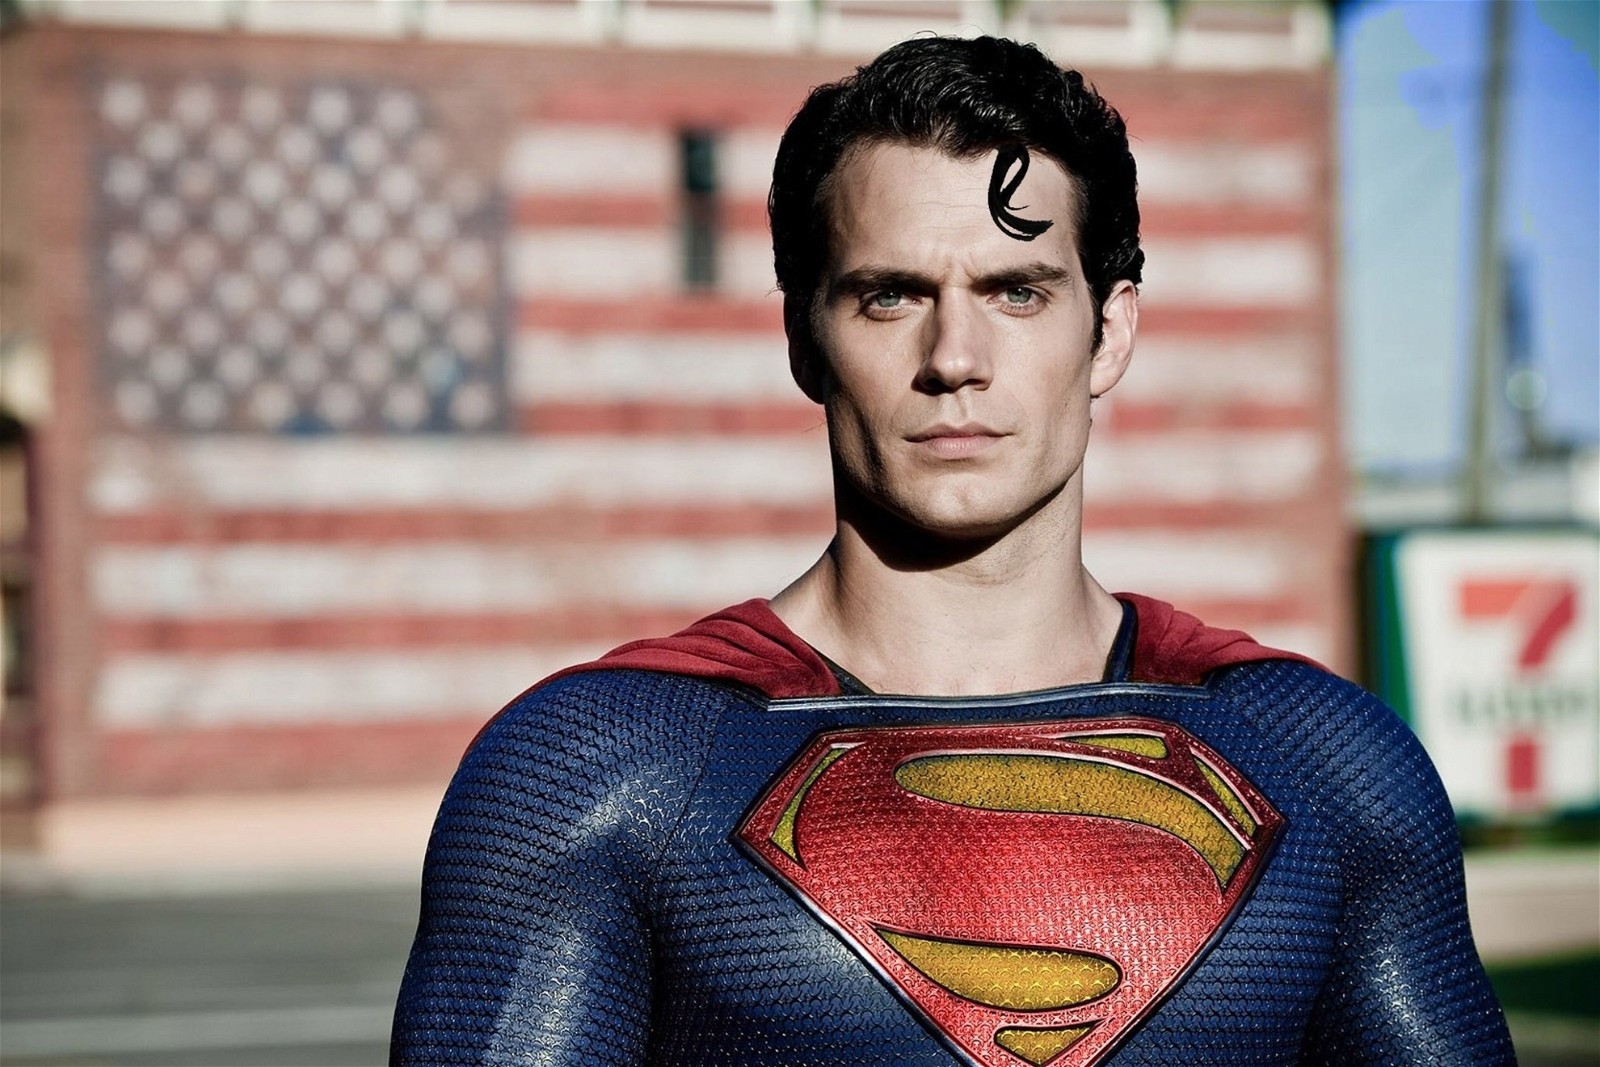 Henry Cavill as the Superman